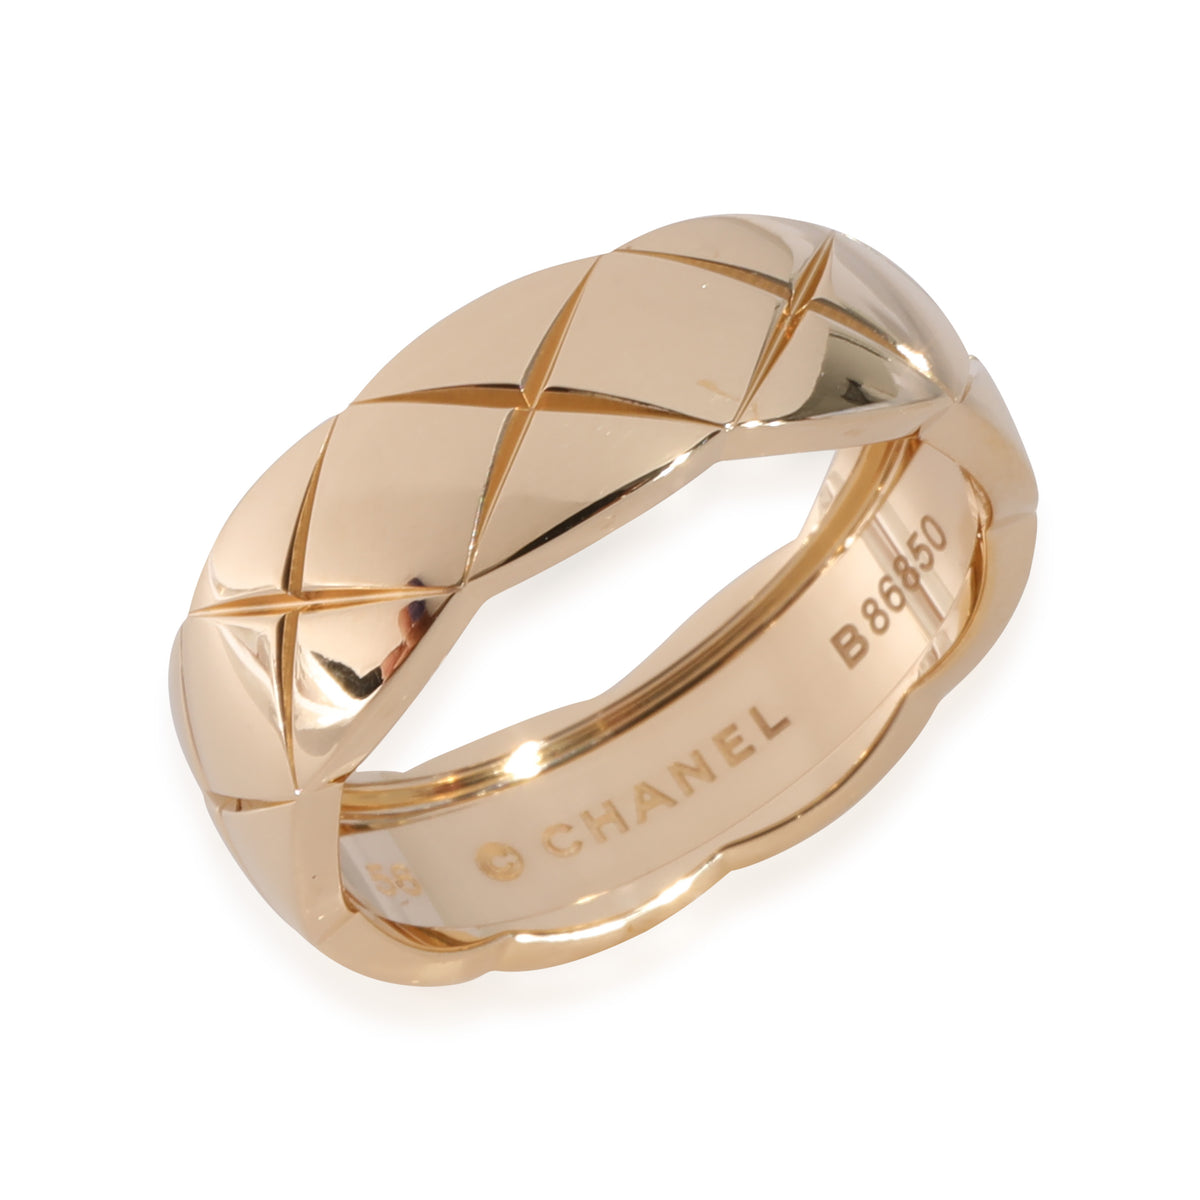 Chanel - Authenticated Coco Crush Ring - Yellow Gold Gold for Women, Very Good Condition